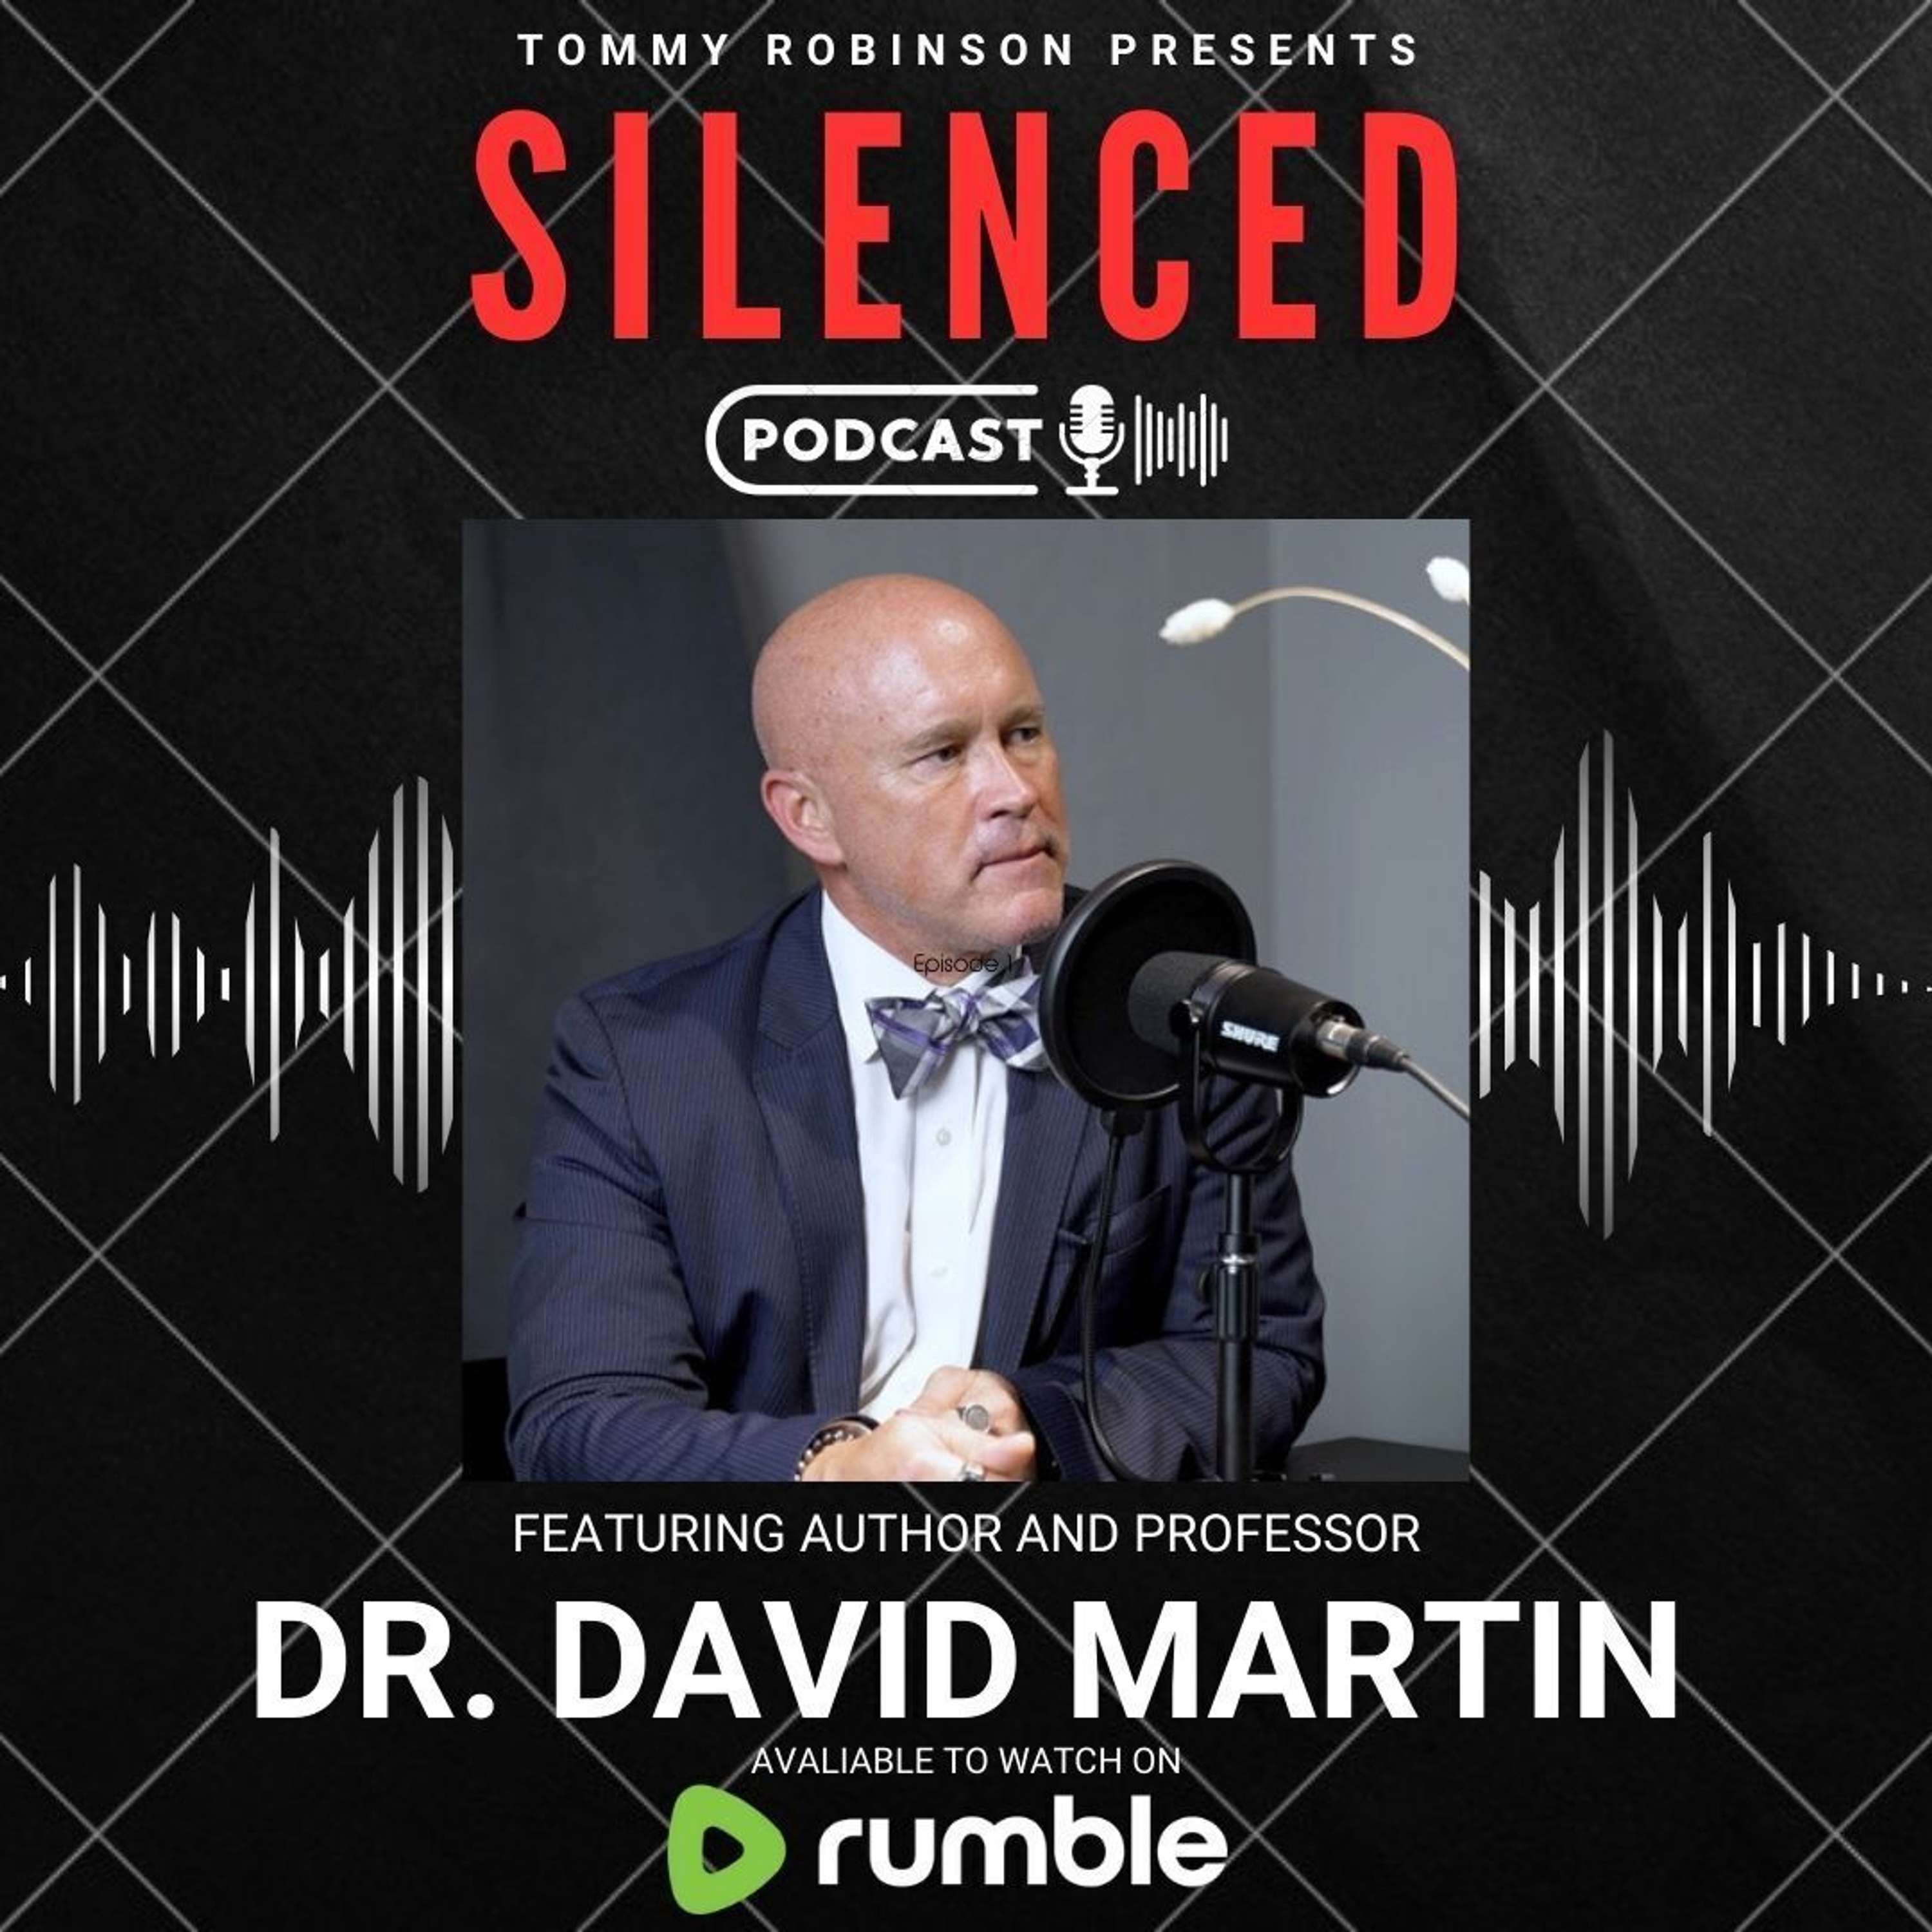 Episode 8 Silenced with Tommy Robinson - Dr David Martin